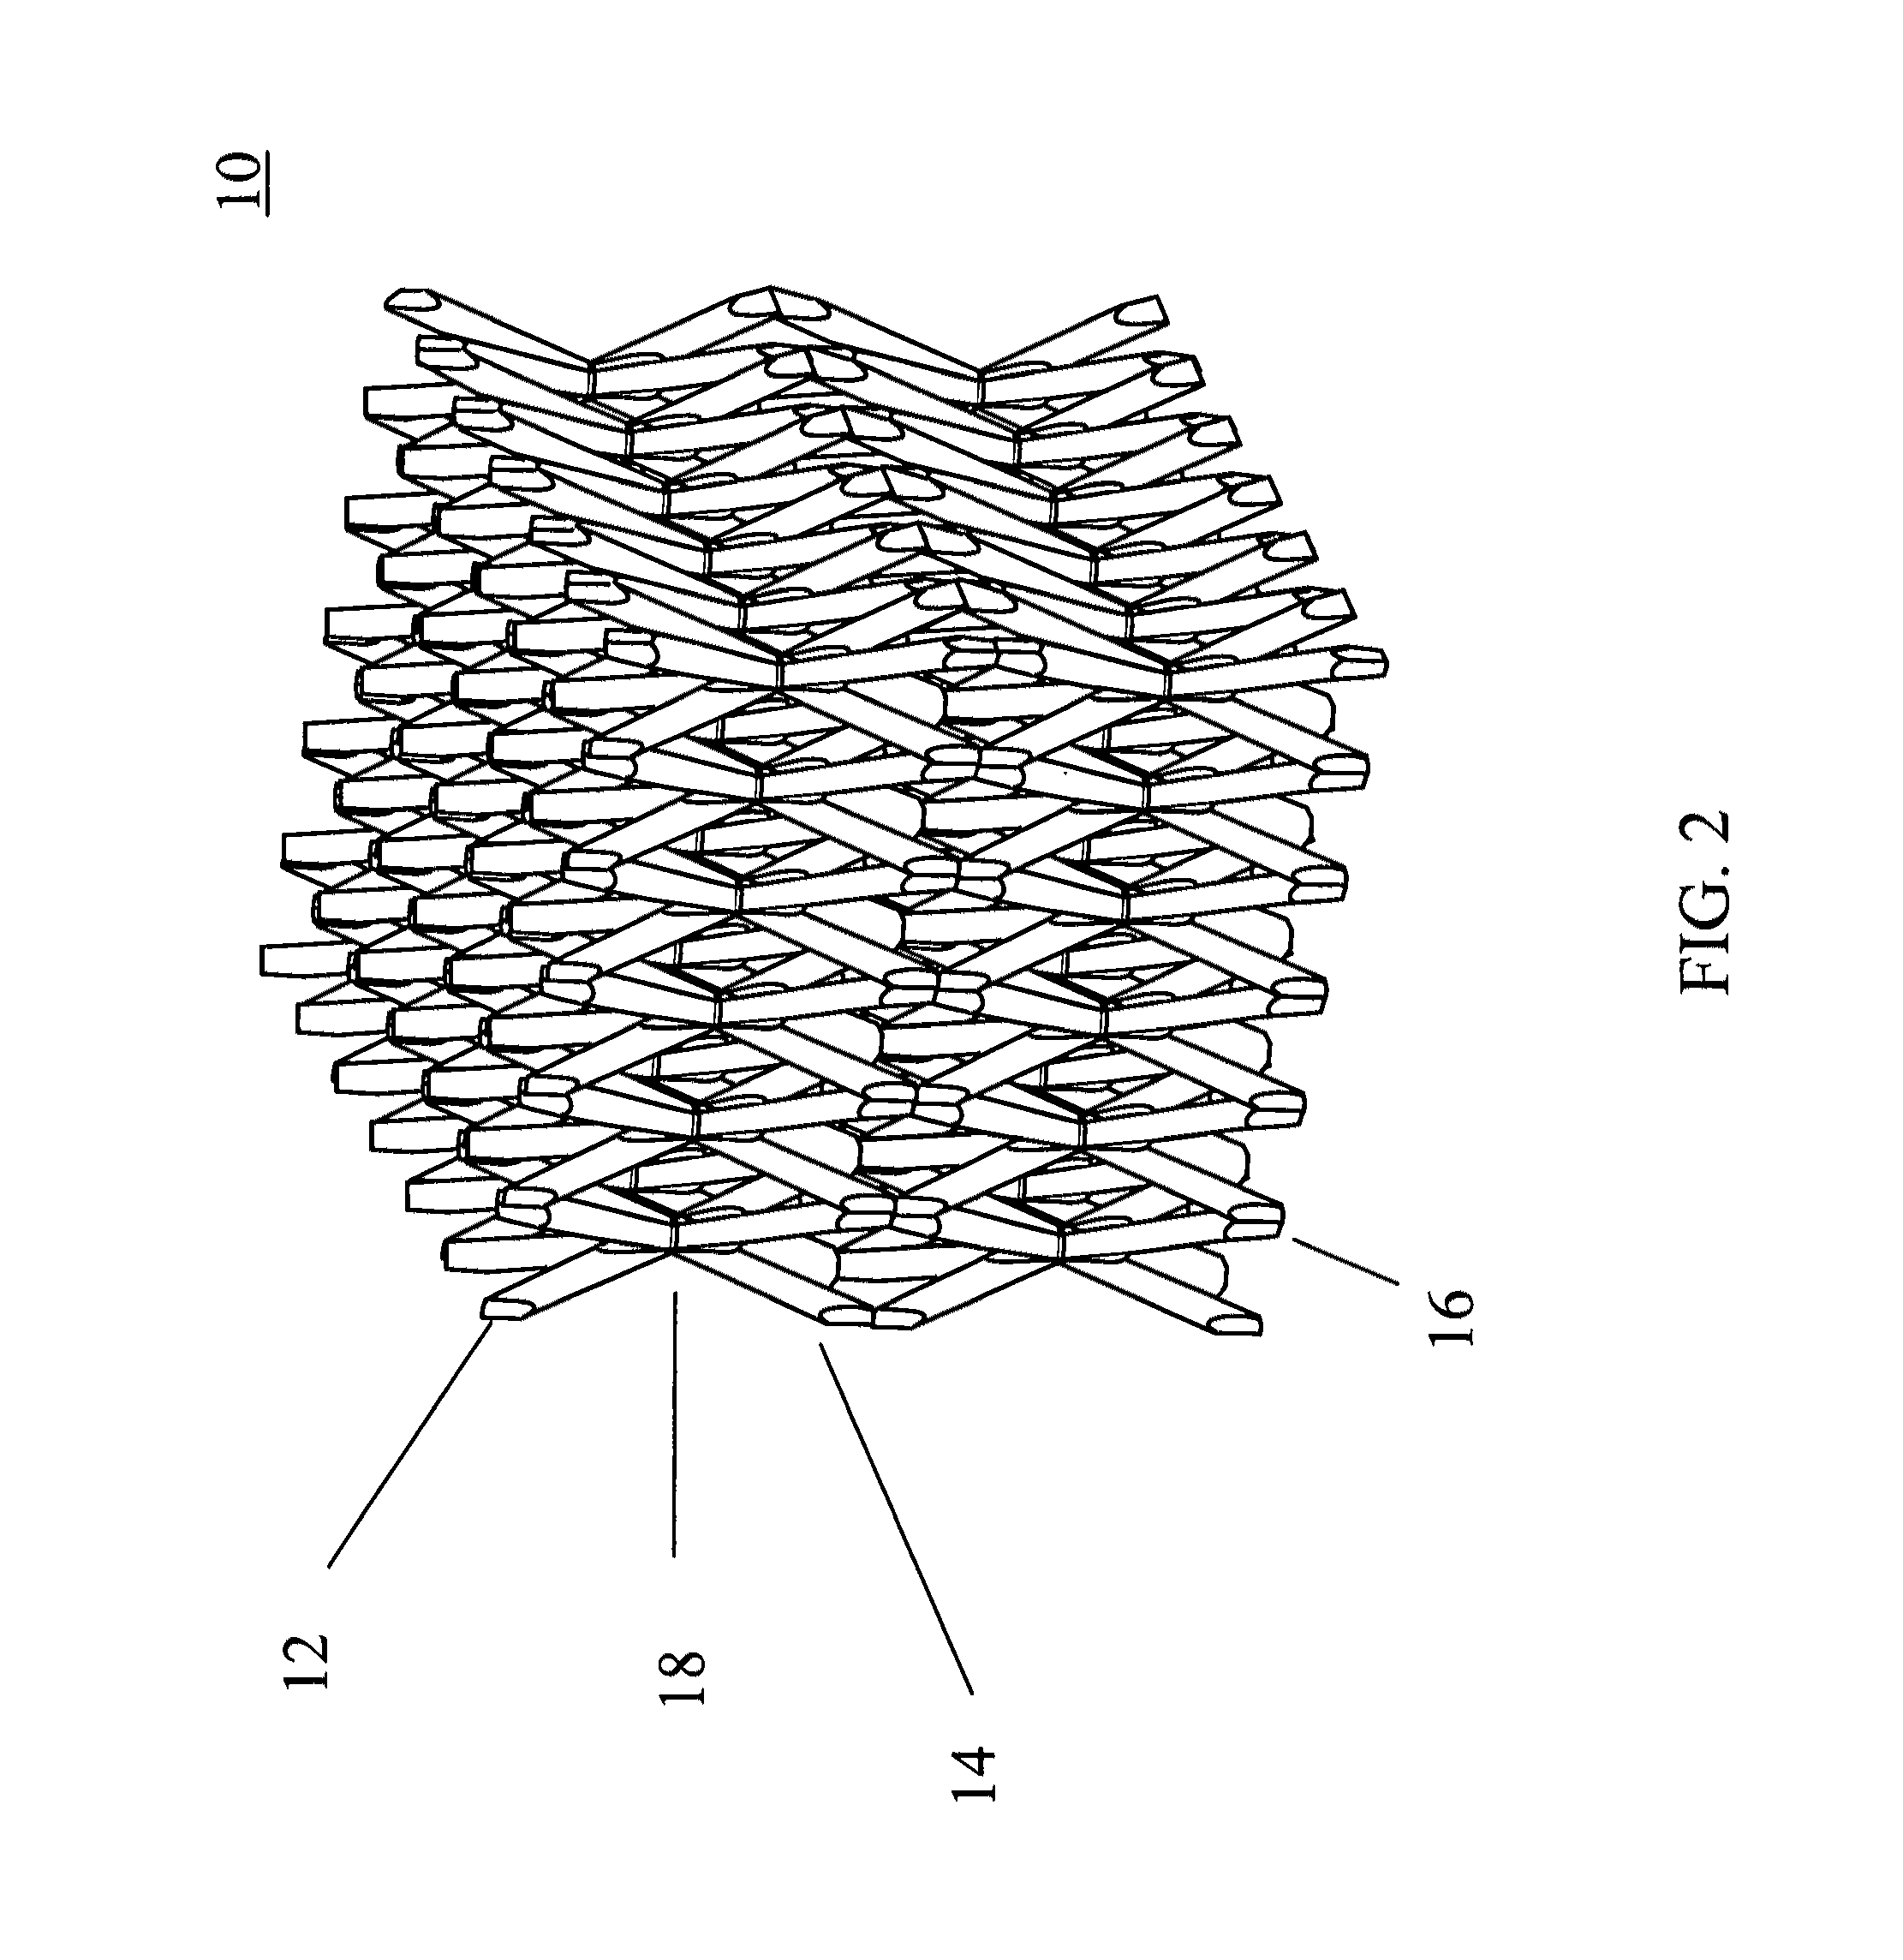 Composite structures with ordered three-dimensional (3D) continuous interpenetrating phases